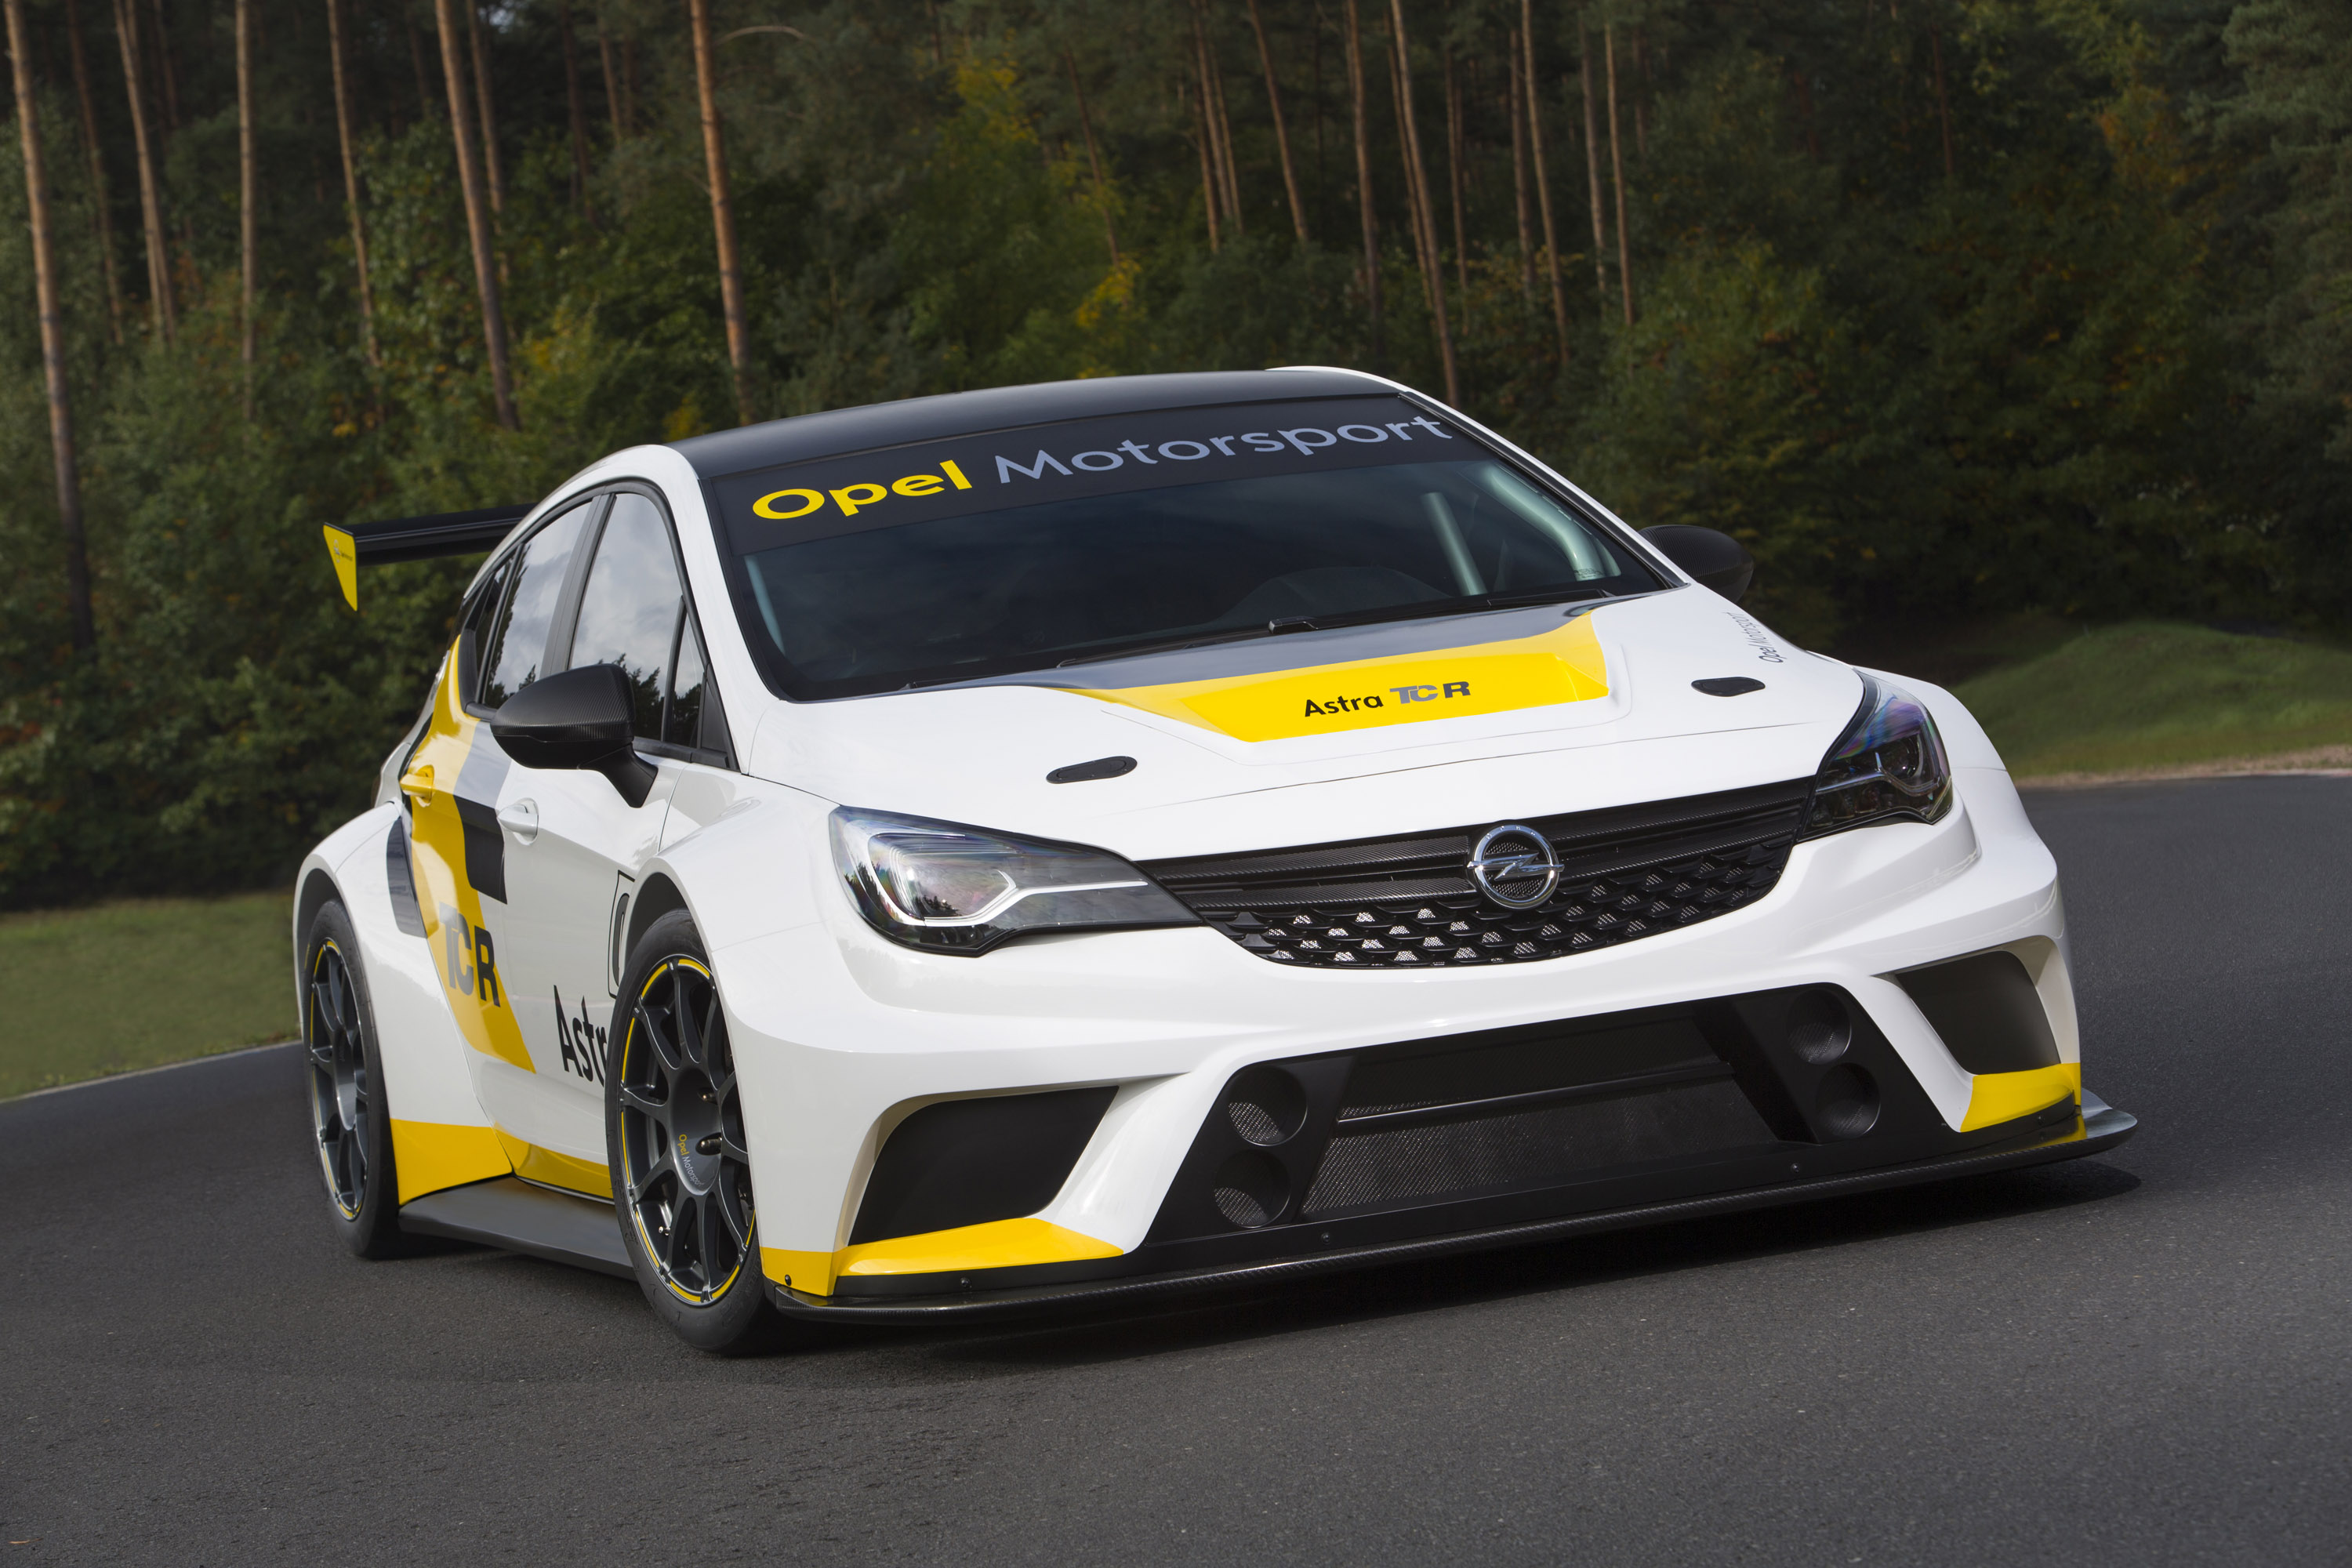 Opel Astra TCR photo #1